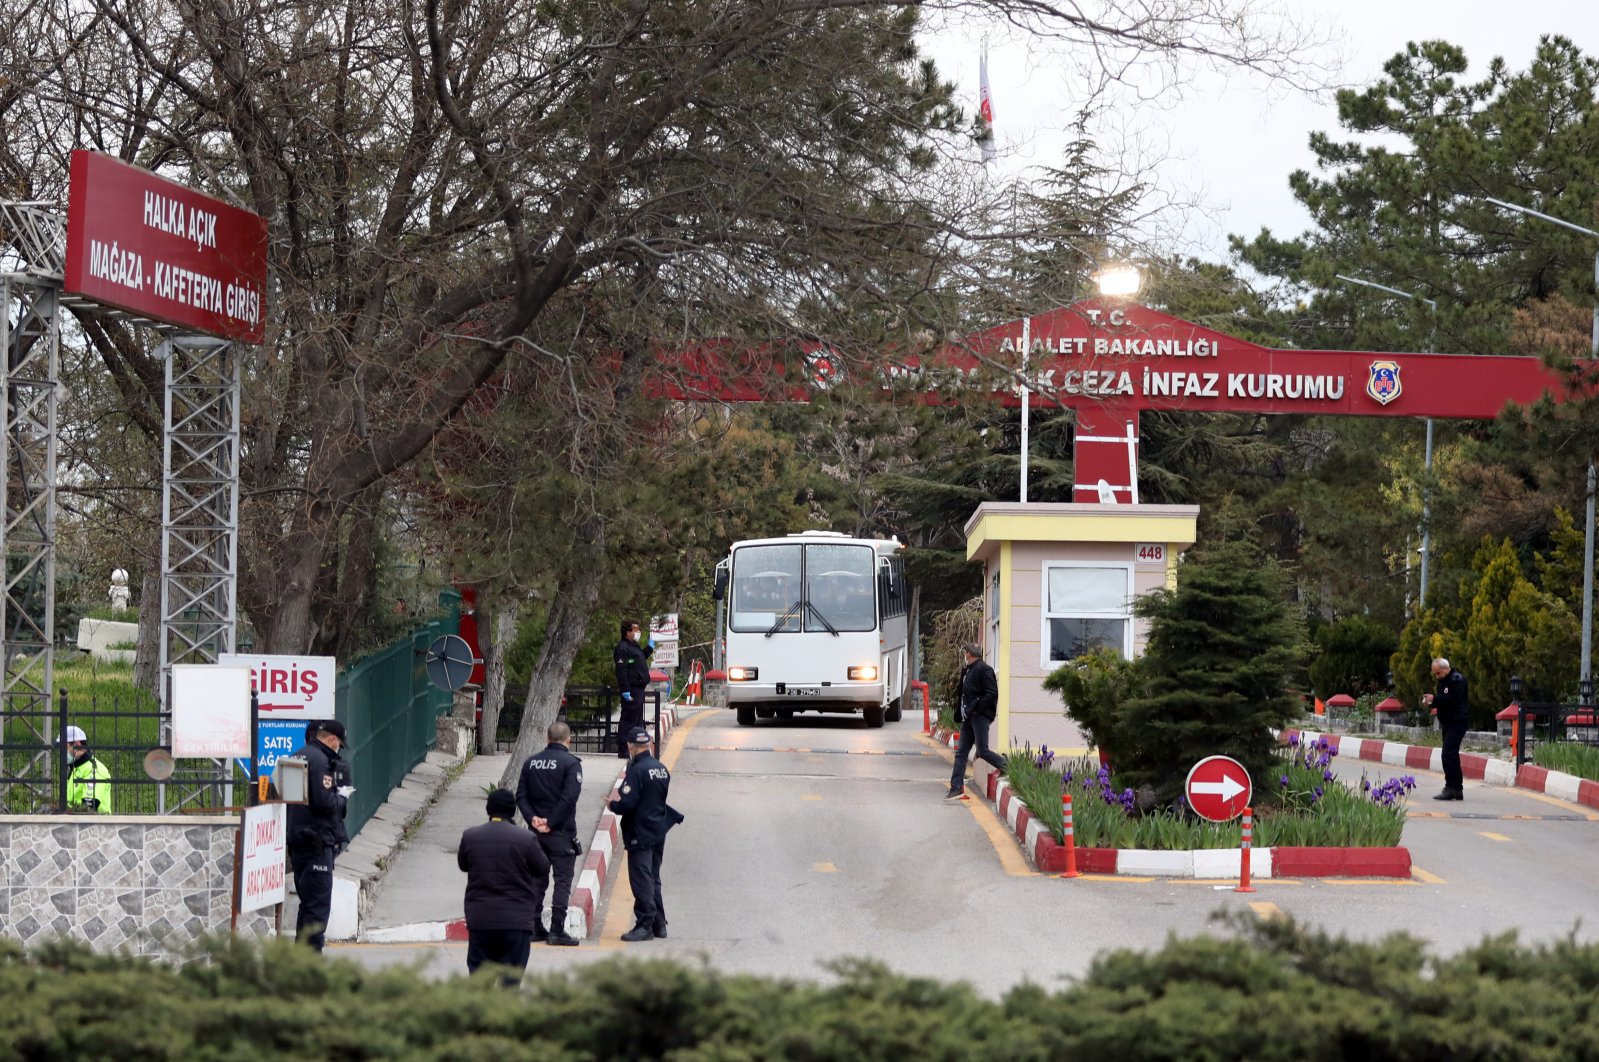 Bus carrying inmates leaves Ankara Penitentiary in the capital Ankara on Wednesday, April 15, 2020. (AA Photo)